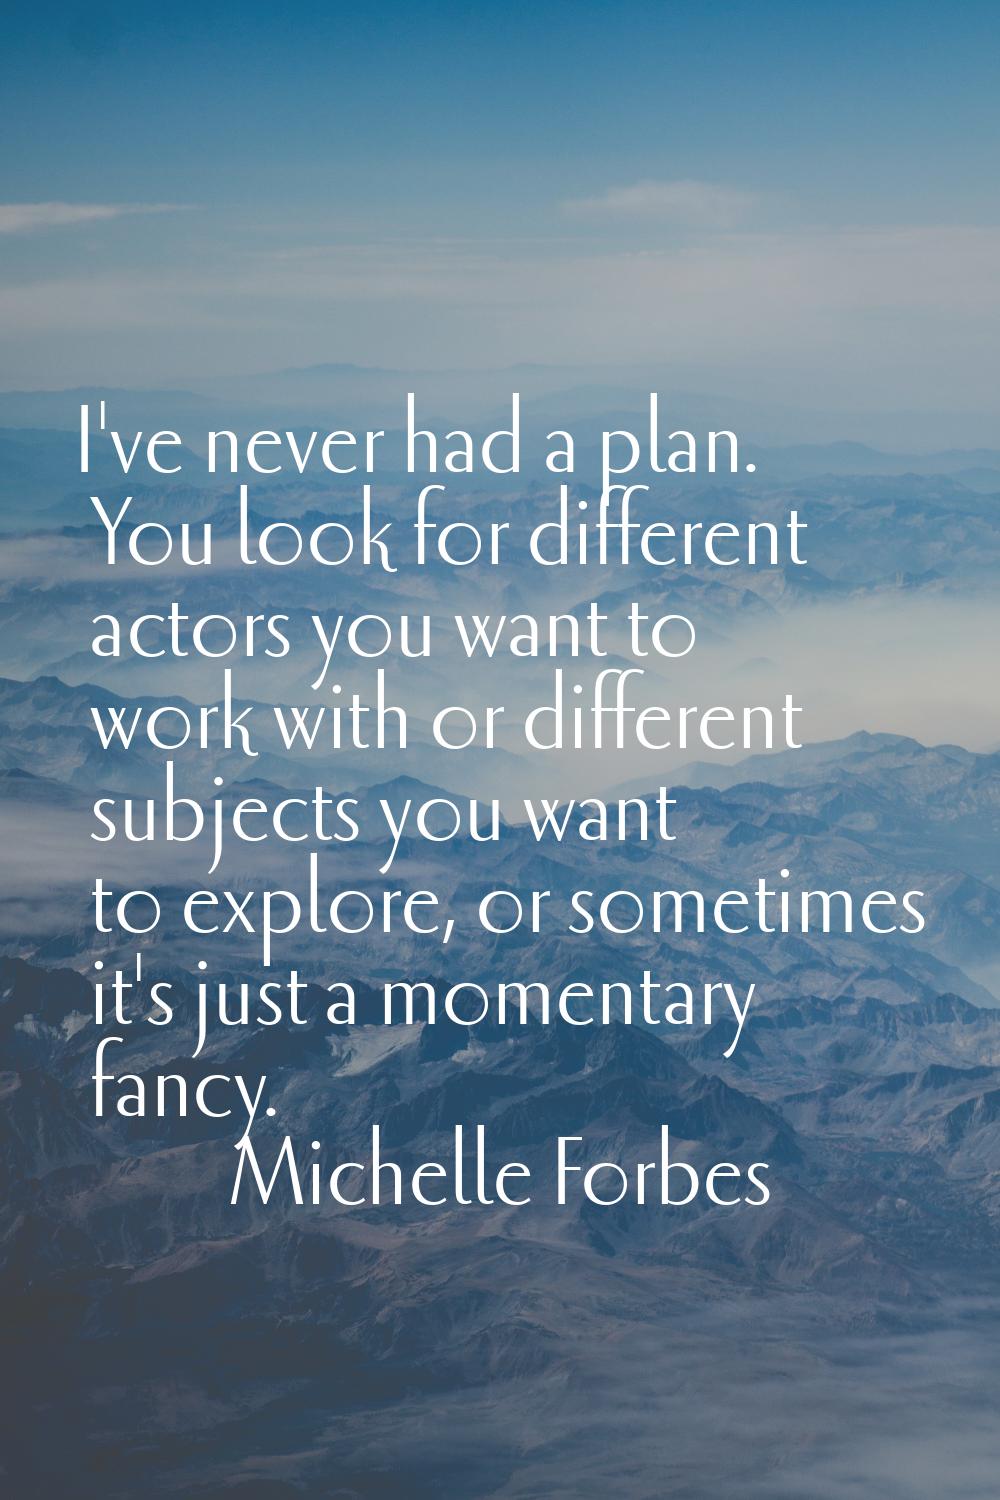 I've never had a plan. You look for different actors you want to work with or different subjects yo